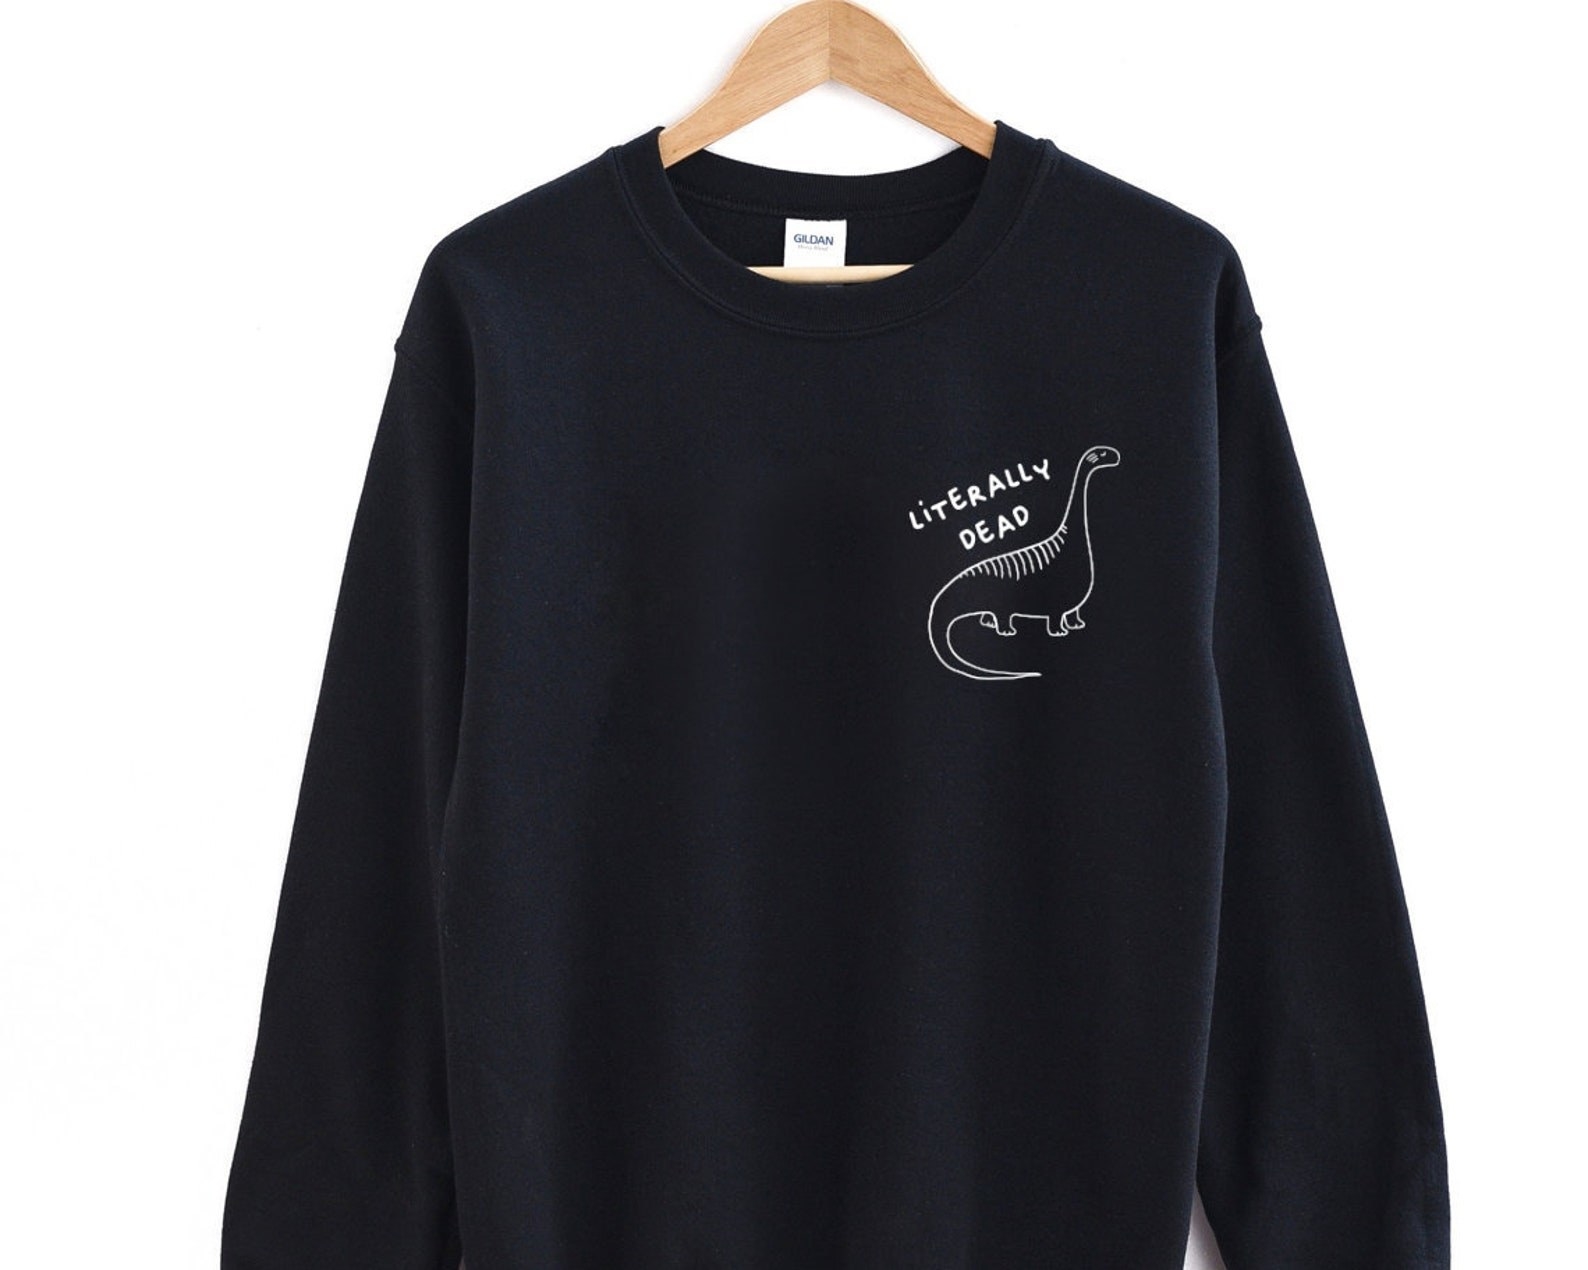 The black sweatshirt printed with a dinosaur and text: literally dead